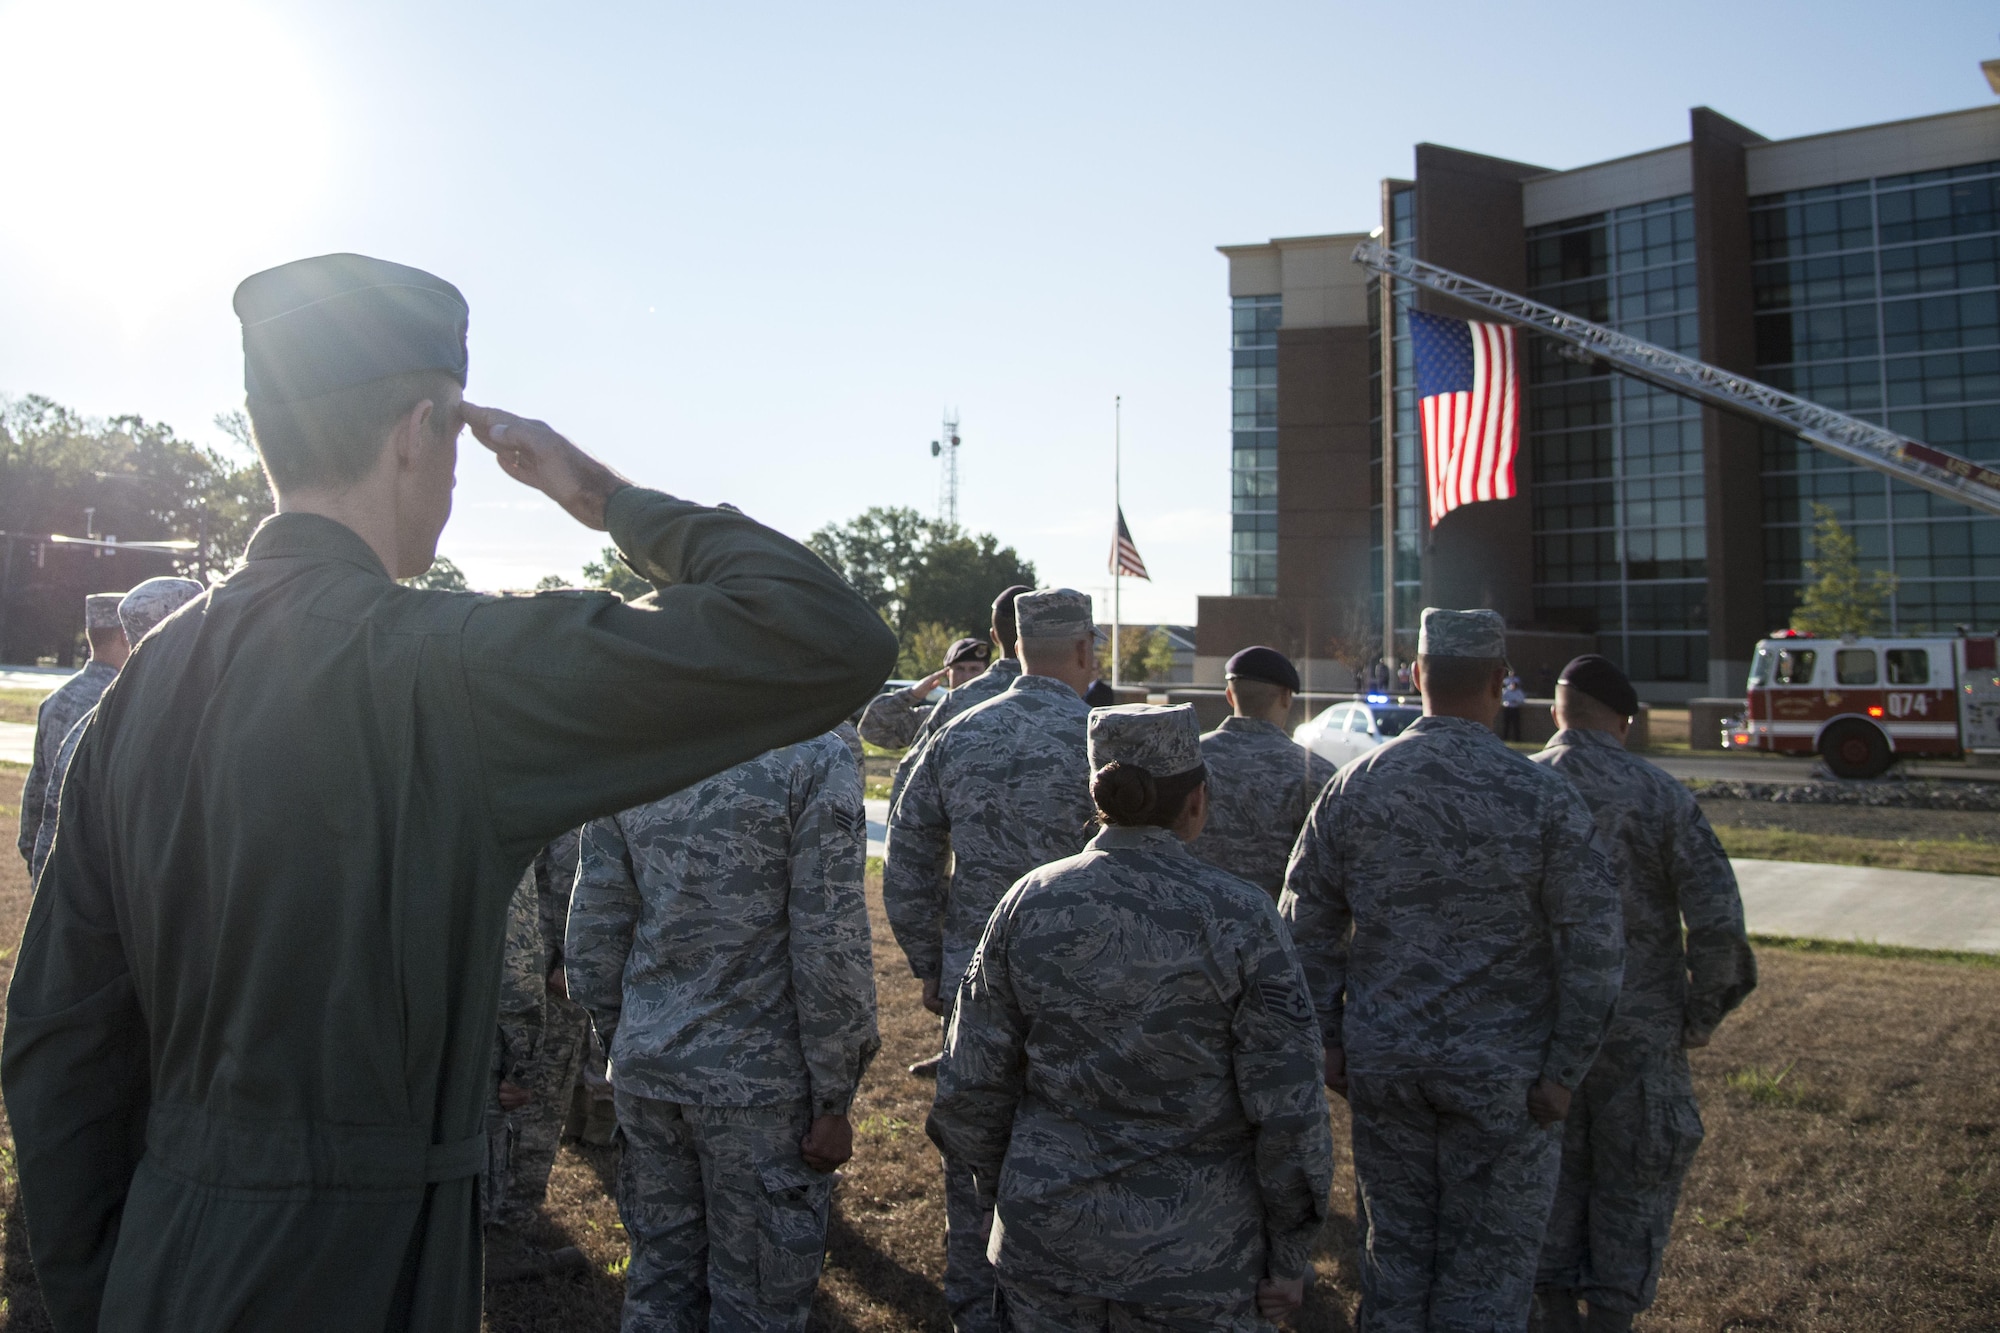 Airmen preform a first responders salute during a Patriot's Day Reveille Ceremony at Heritage Park, Joint Base Andrews, Md., Sept. 11, 2015. The paid tribute to the first responders and victims of the terrorist attacks on Sept. 11, 2001. (U.S. Air Force photo/Airman 1st Class Philip Bryant) 